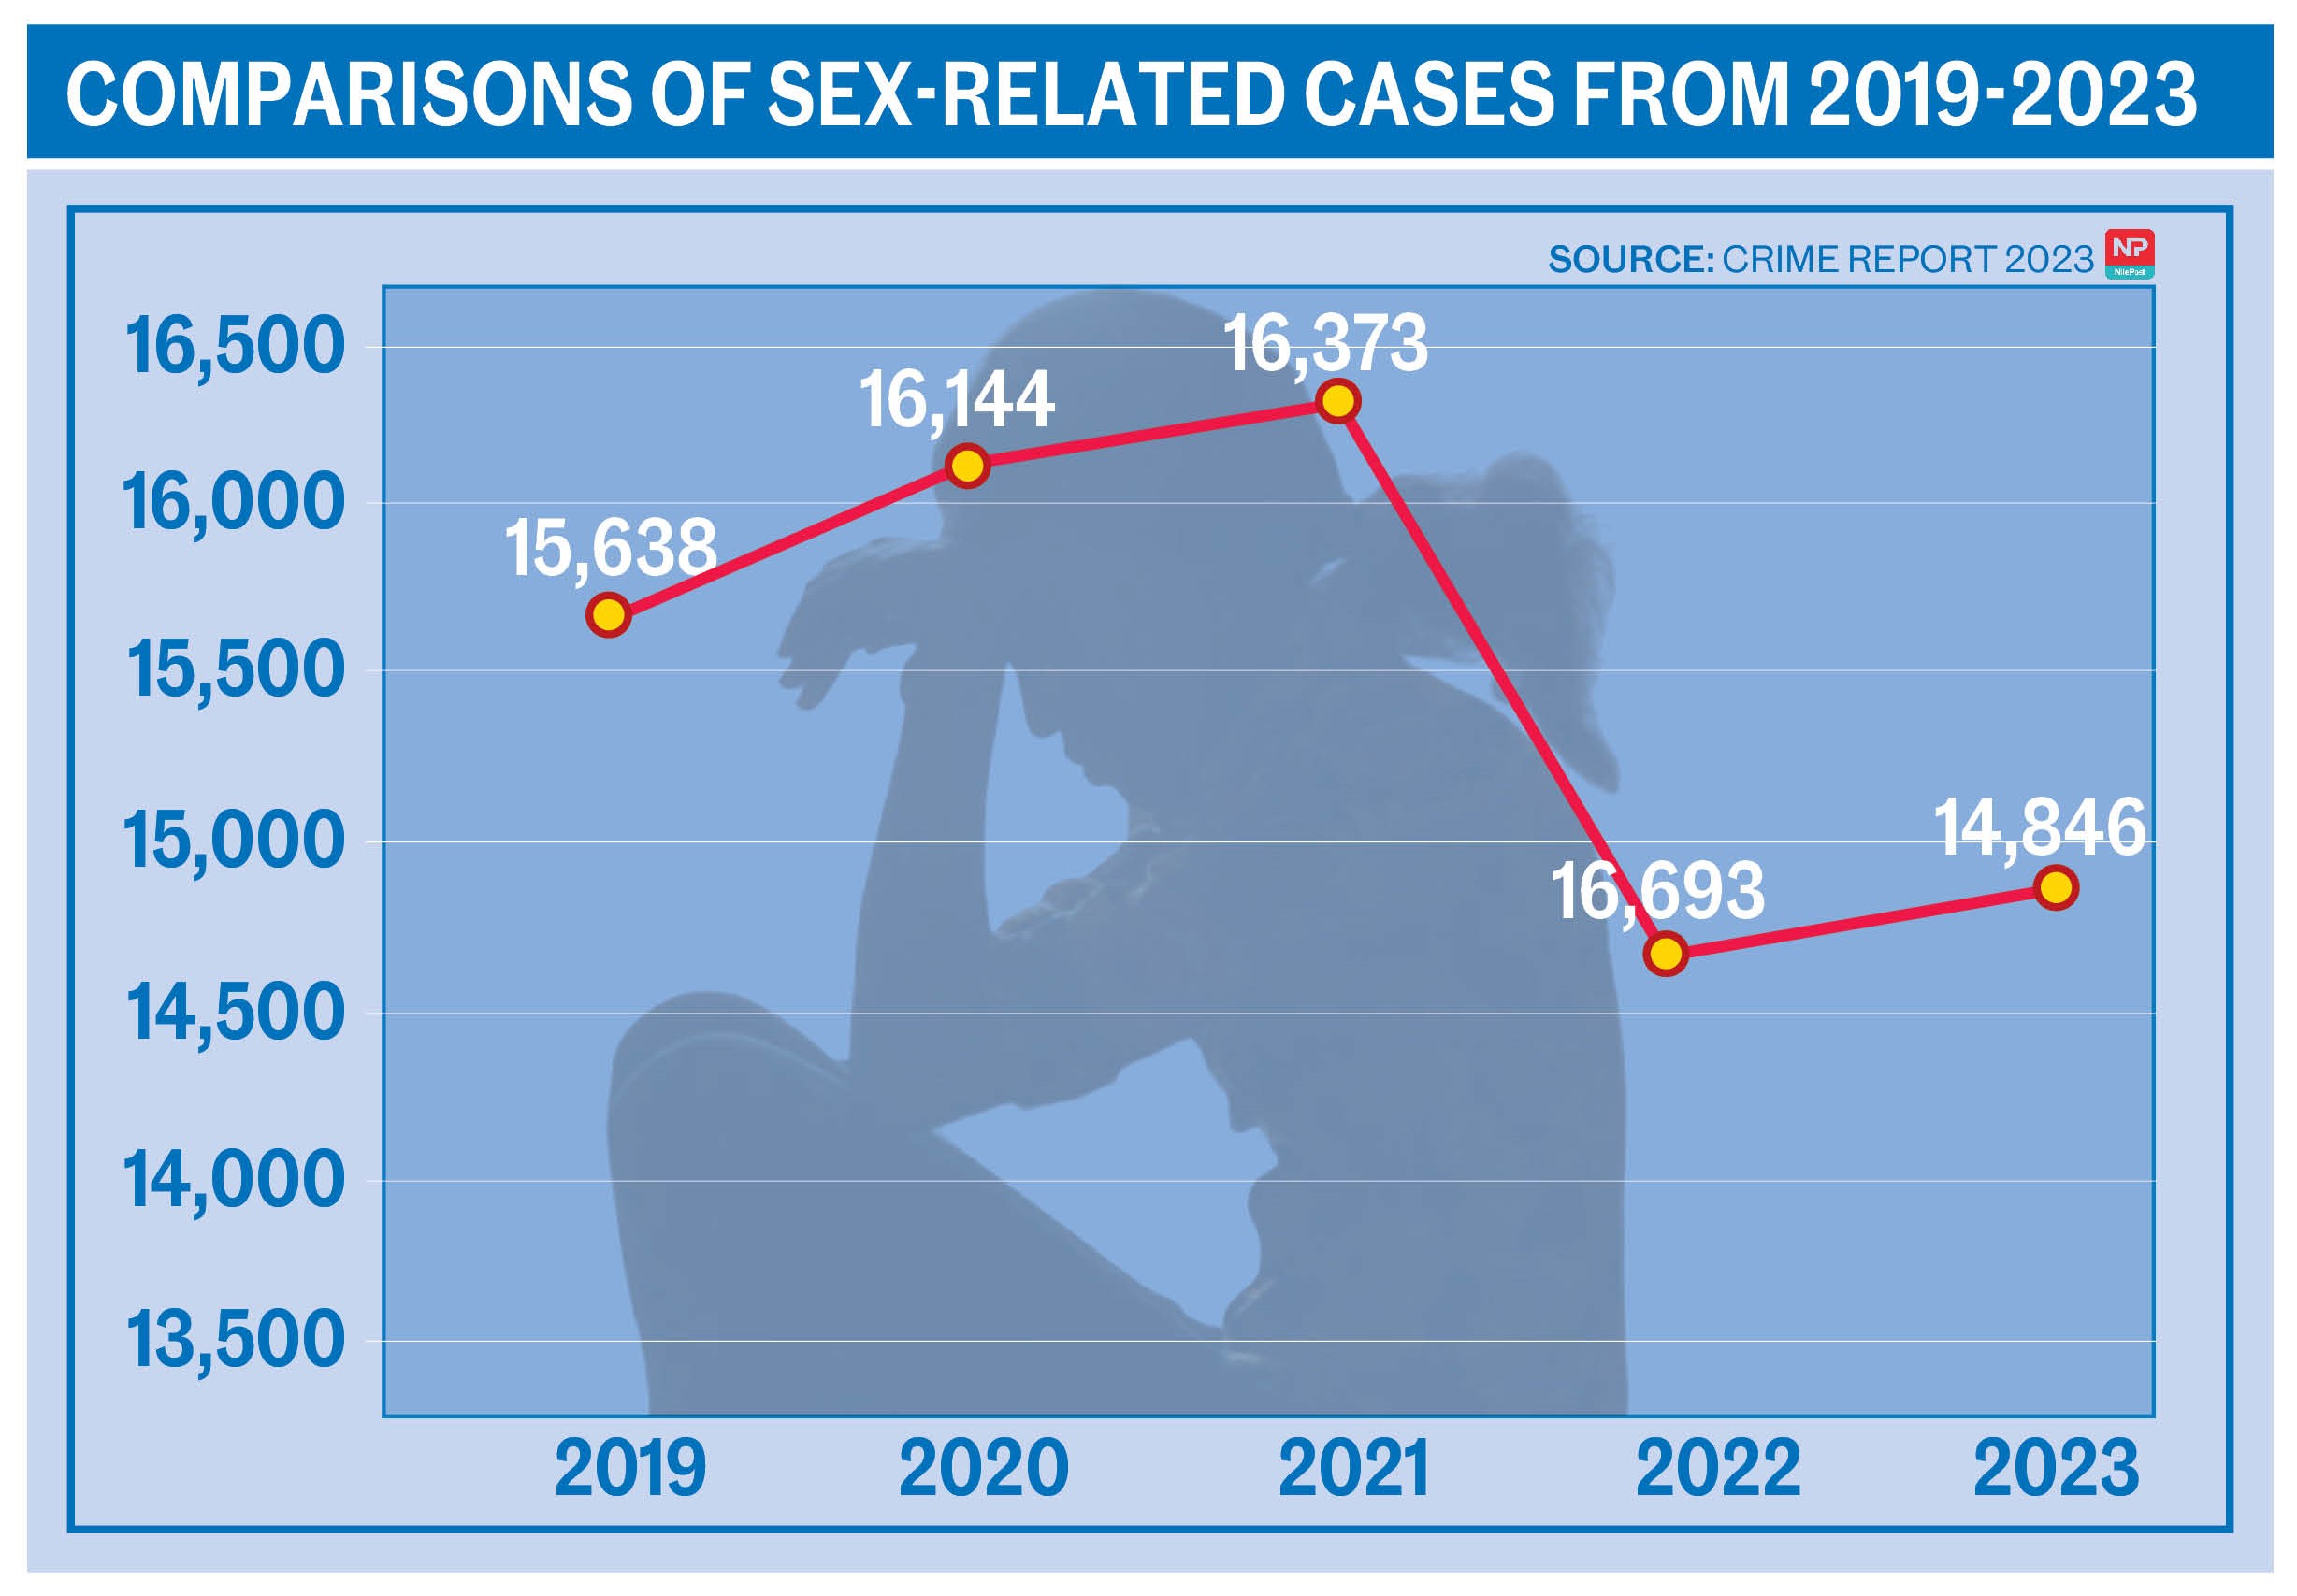 Decline in sex-related crimes reflects shift in judicial response